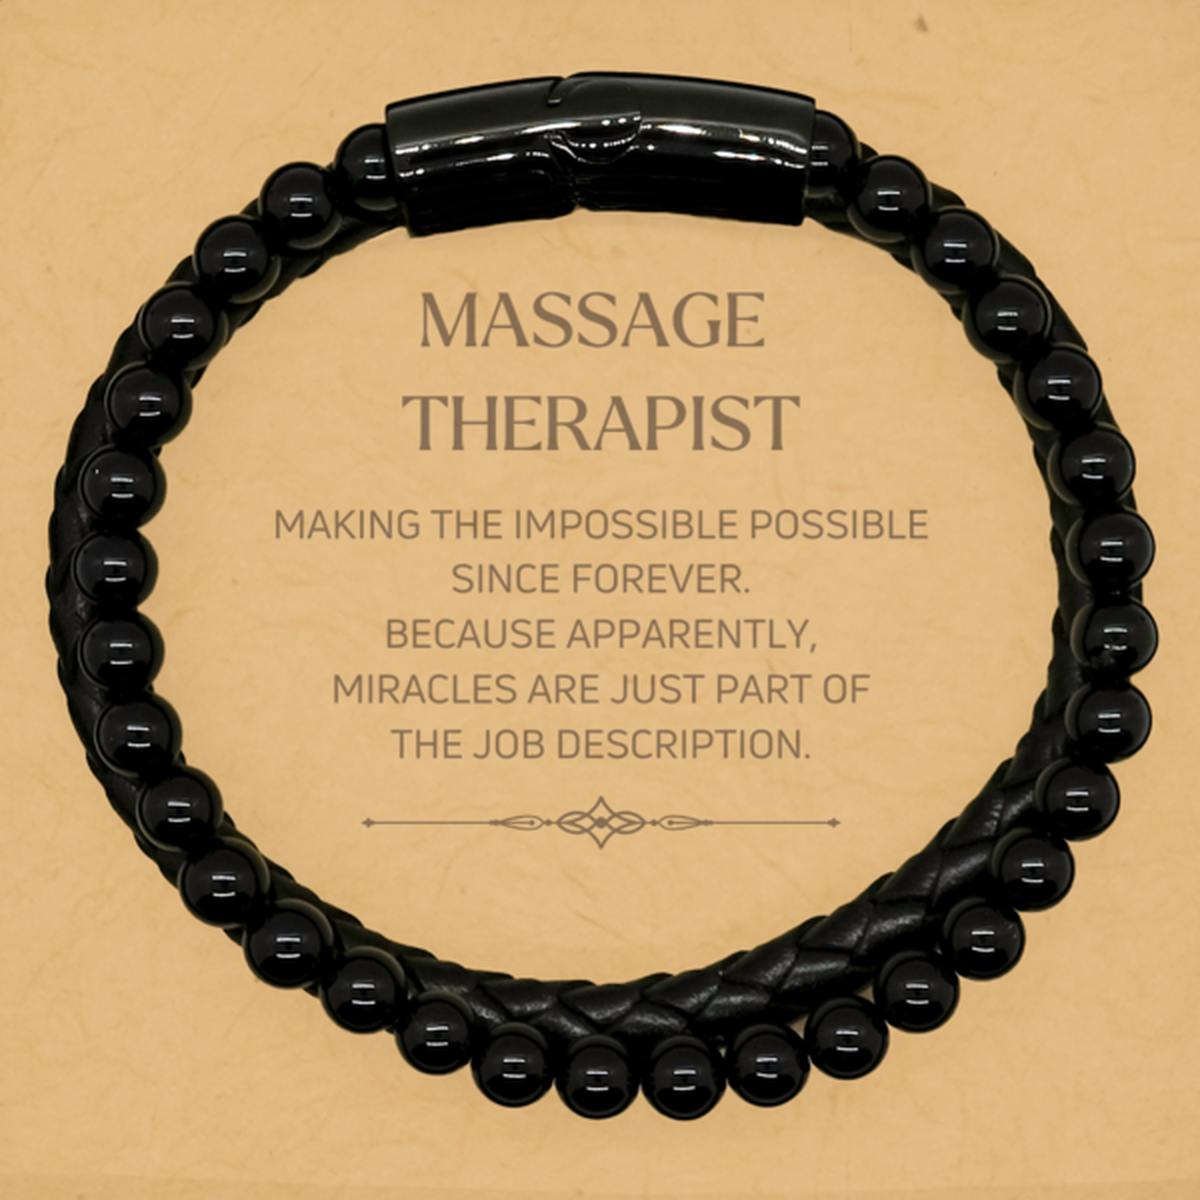 Funny Massage Therapist Gifts, Miracles are just part of the job description, Inspirational Birthday Stone Leather Bracelets For Massage Therapist, Men, Women, Coworkers, Friends, Boss